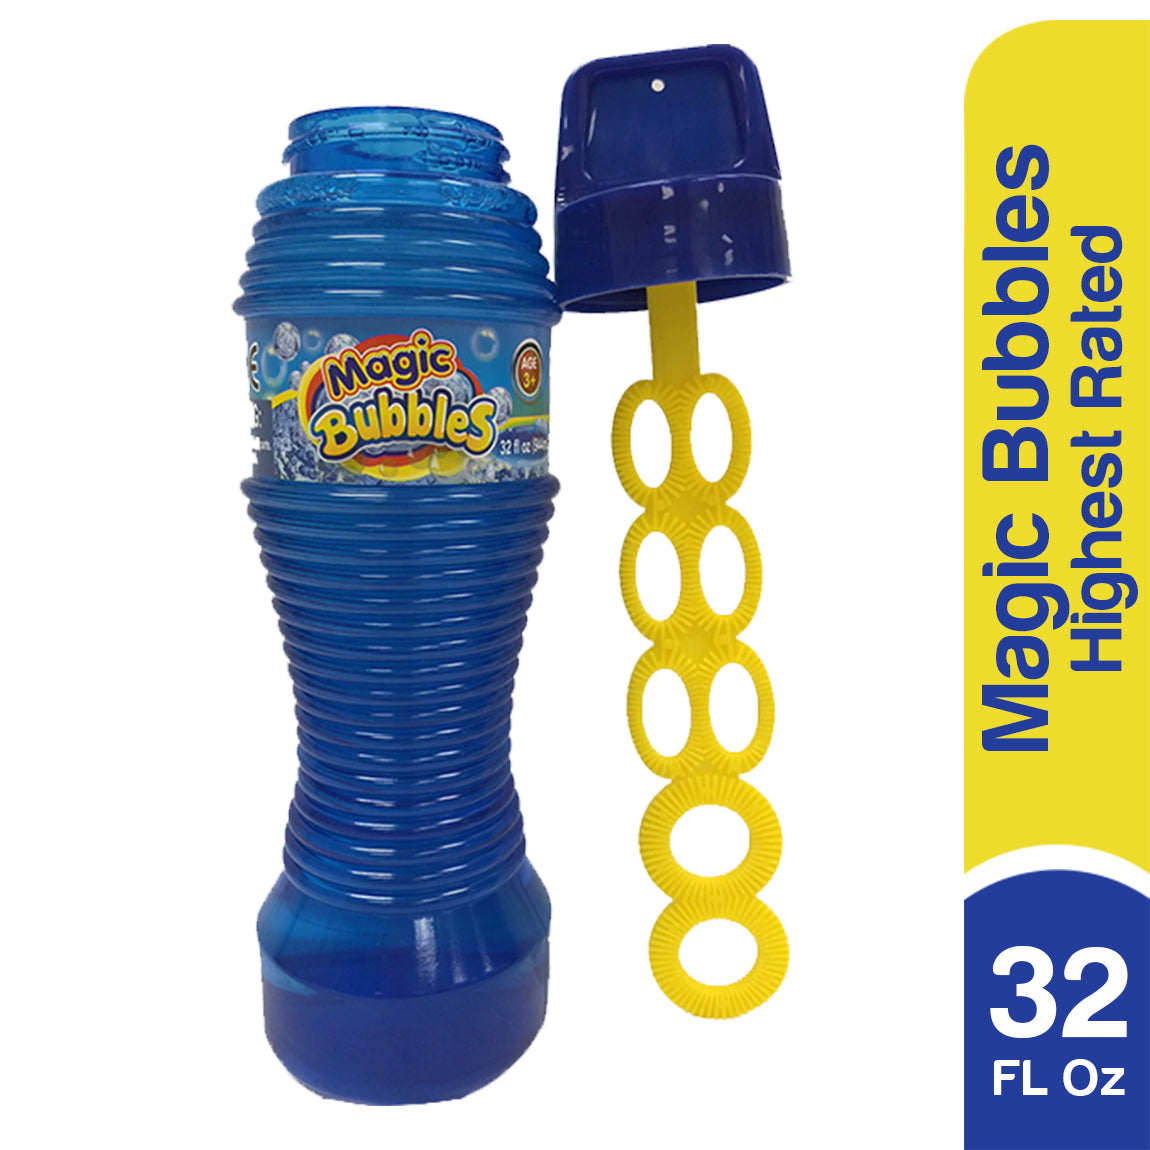 Buy Bubble Magic Bubble Solution Bottle with wand 944 ML for kids